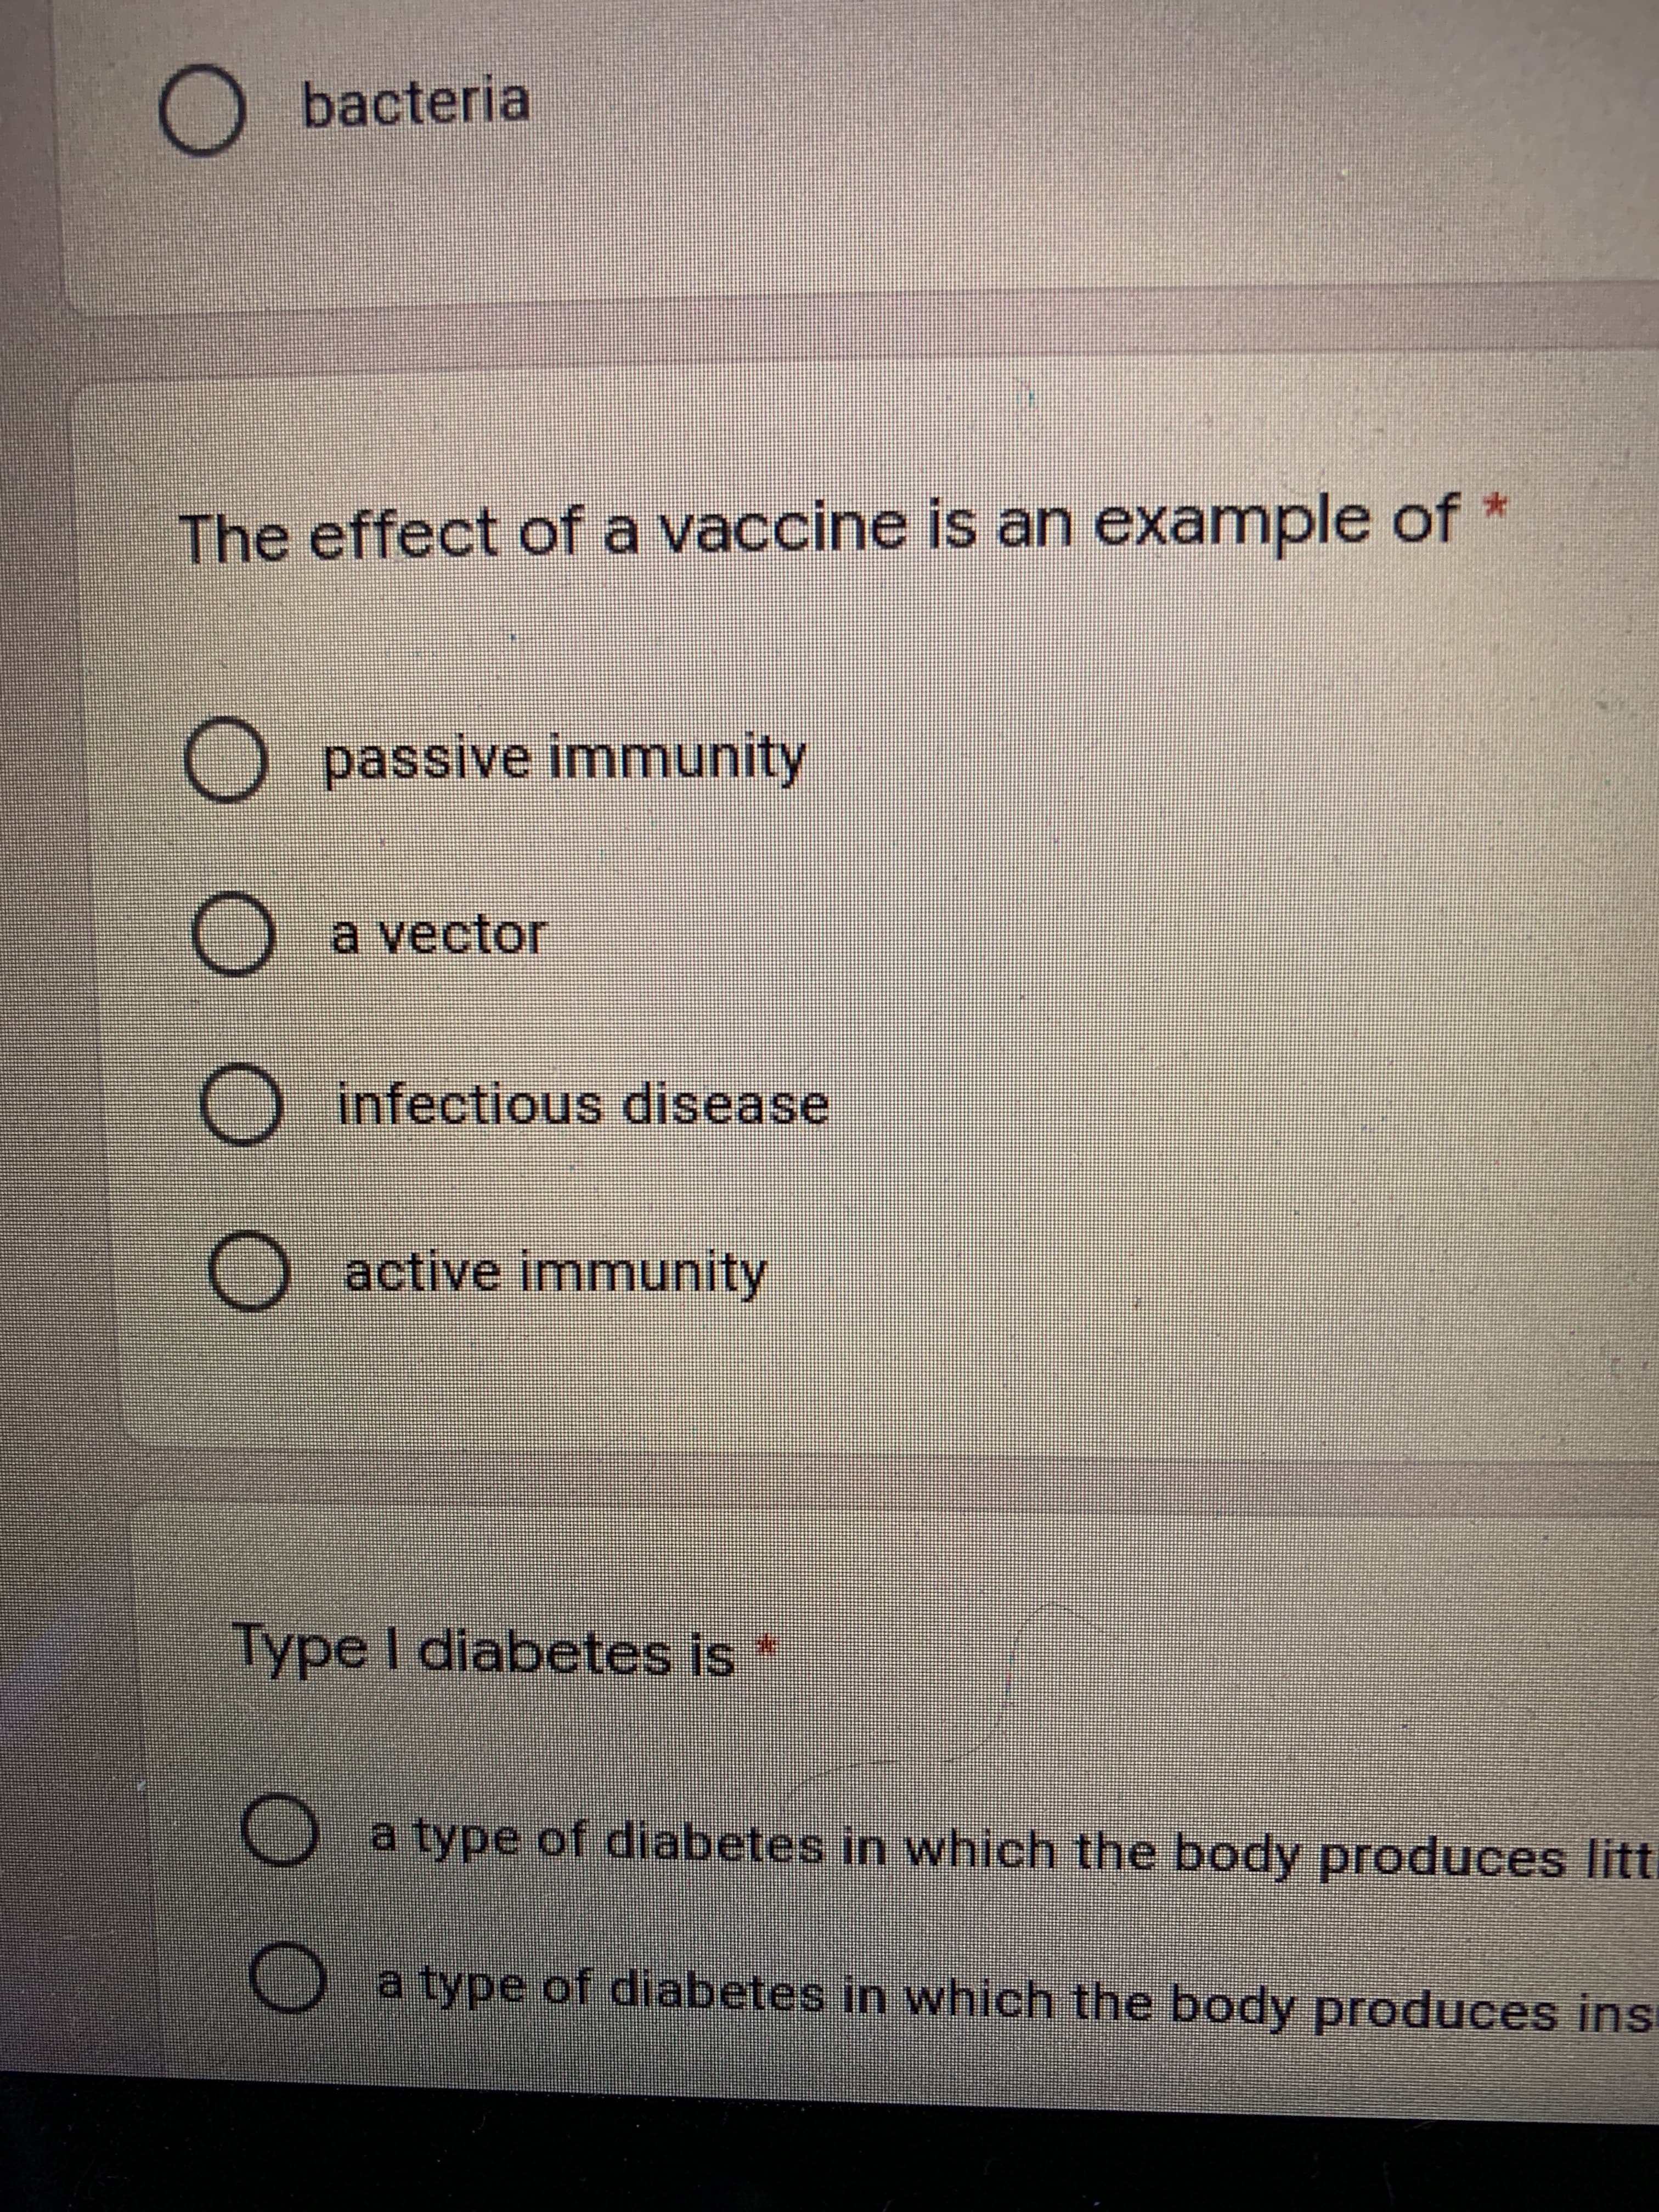 *
The effect of a vaccine is an example of
